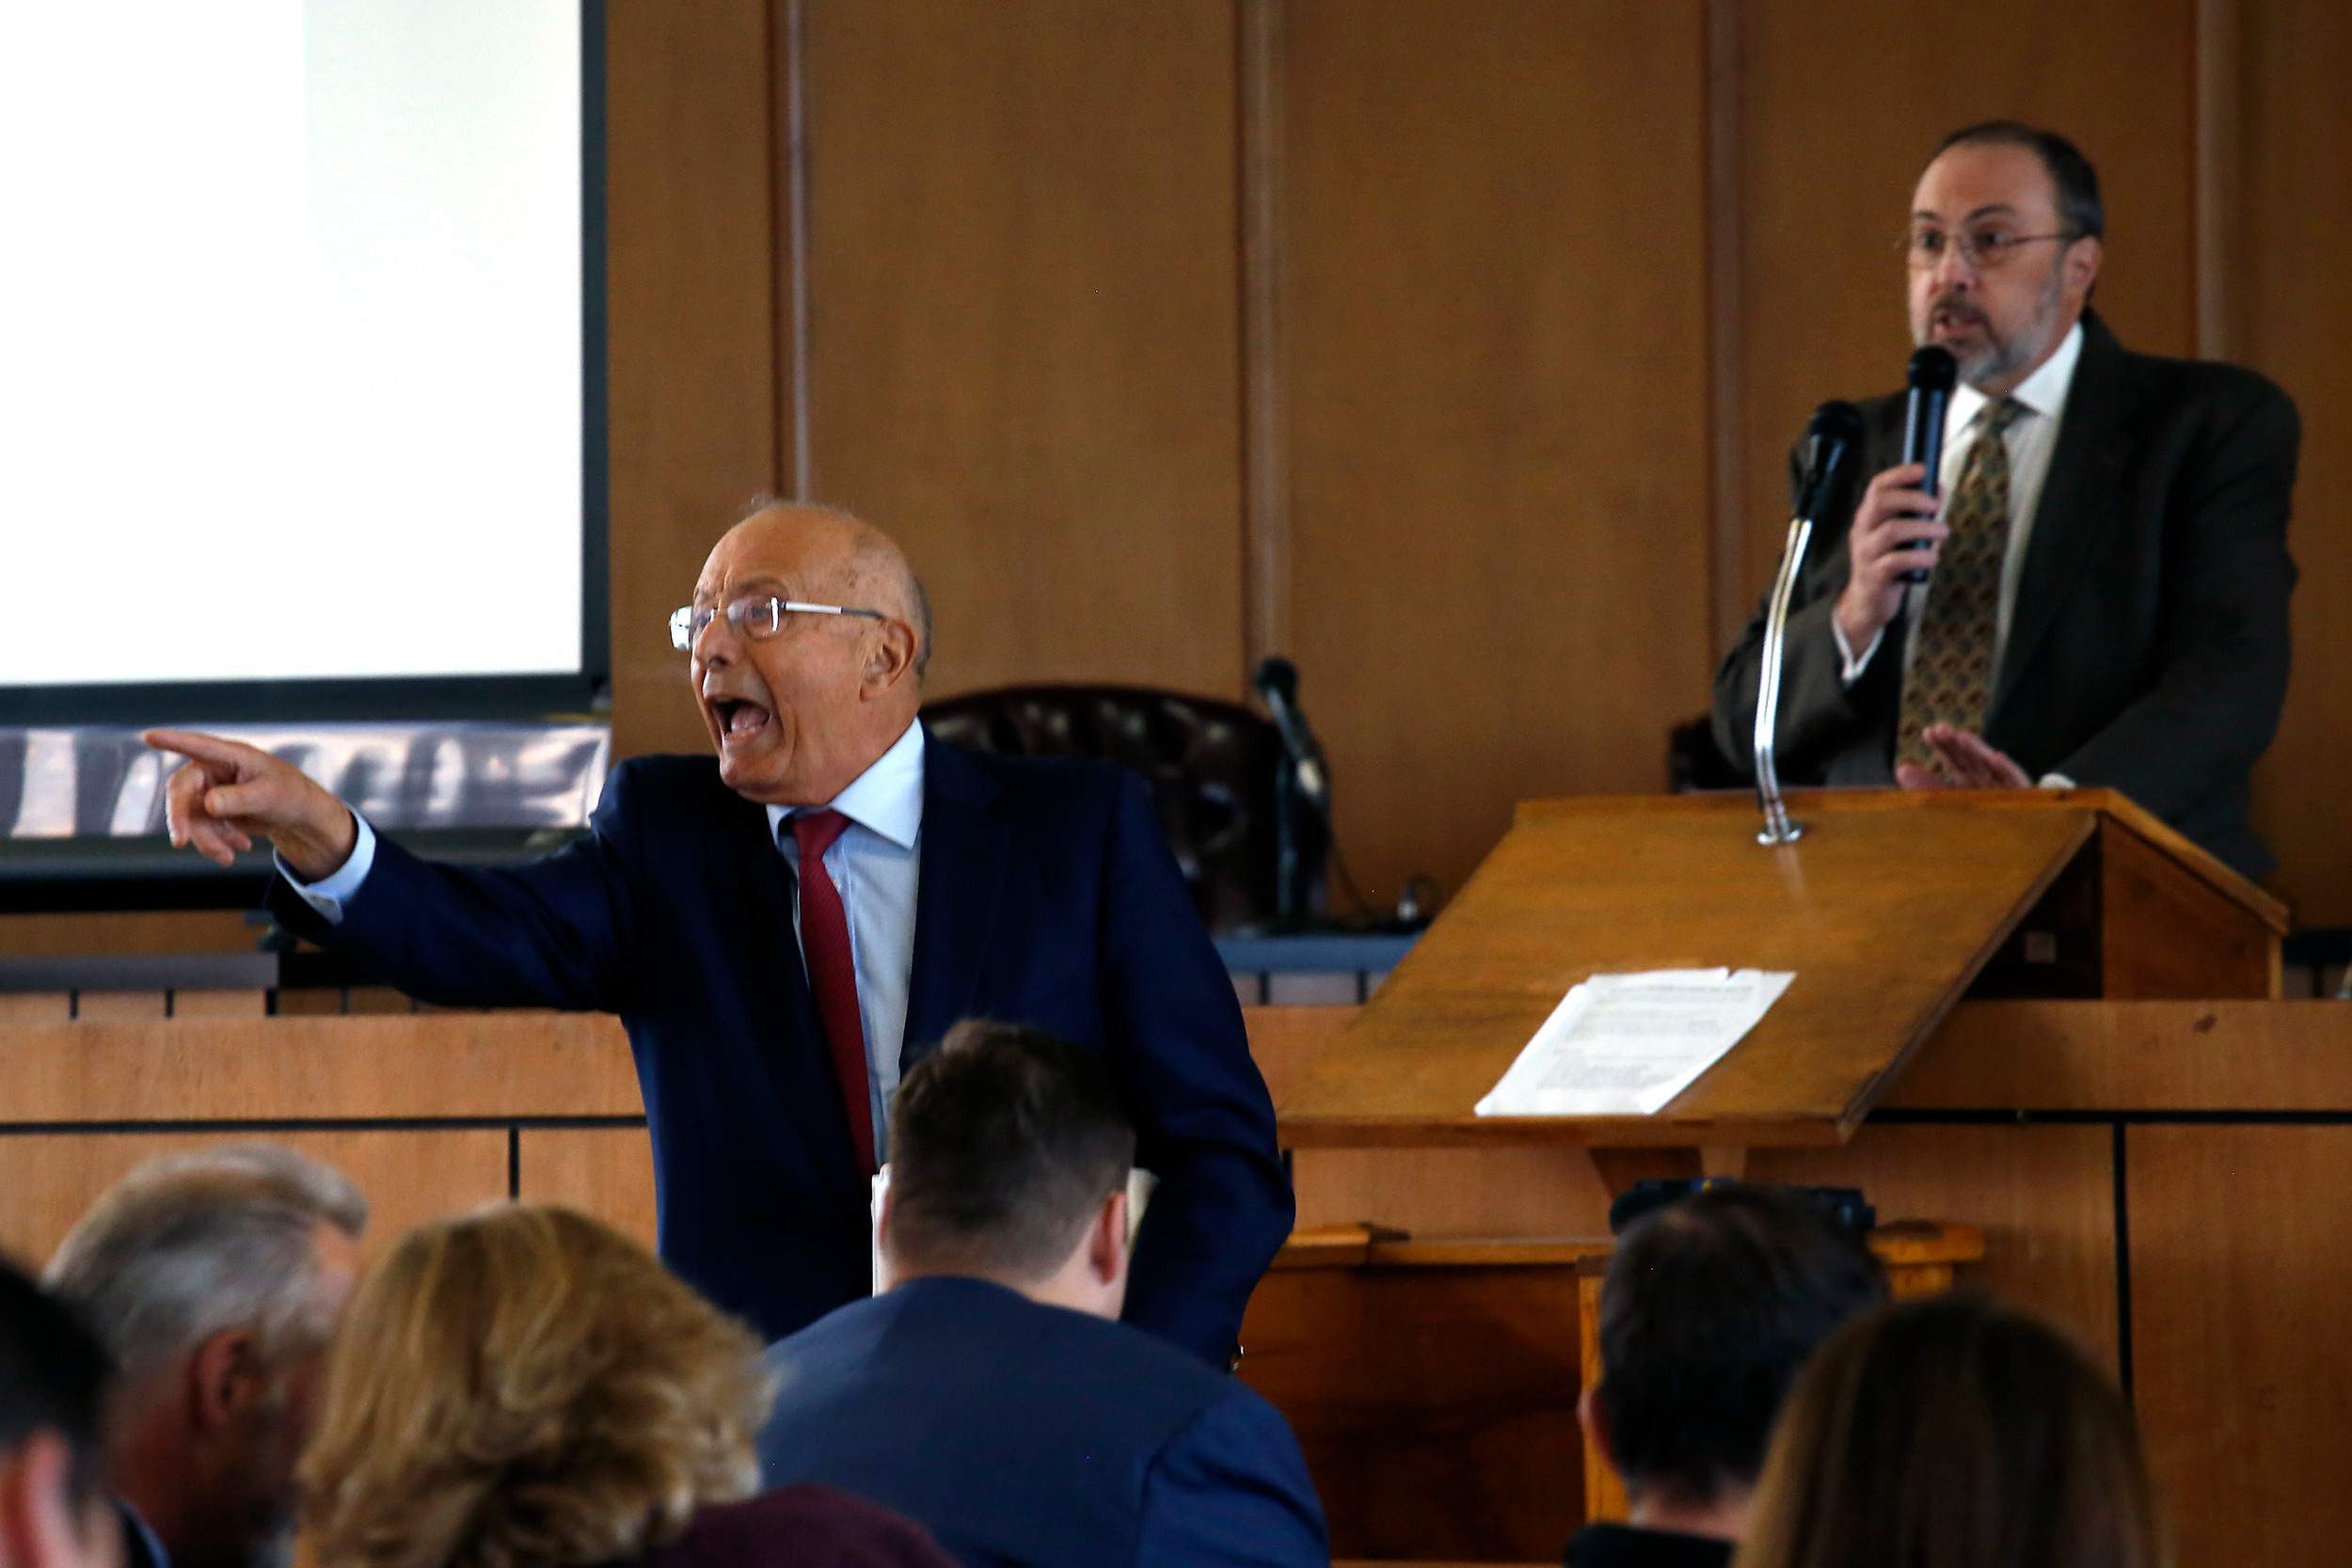 Former U.S. Sen. Al D’Amato stormed out of City Hall on Tuesday after residents were told that questions would only be taken on index cards at a public meeting the city held to update residents about iStar's latest request for tax breaks and potential litigation against the city.